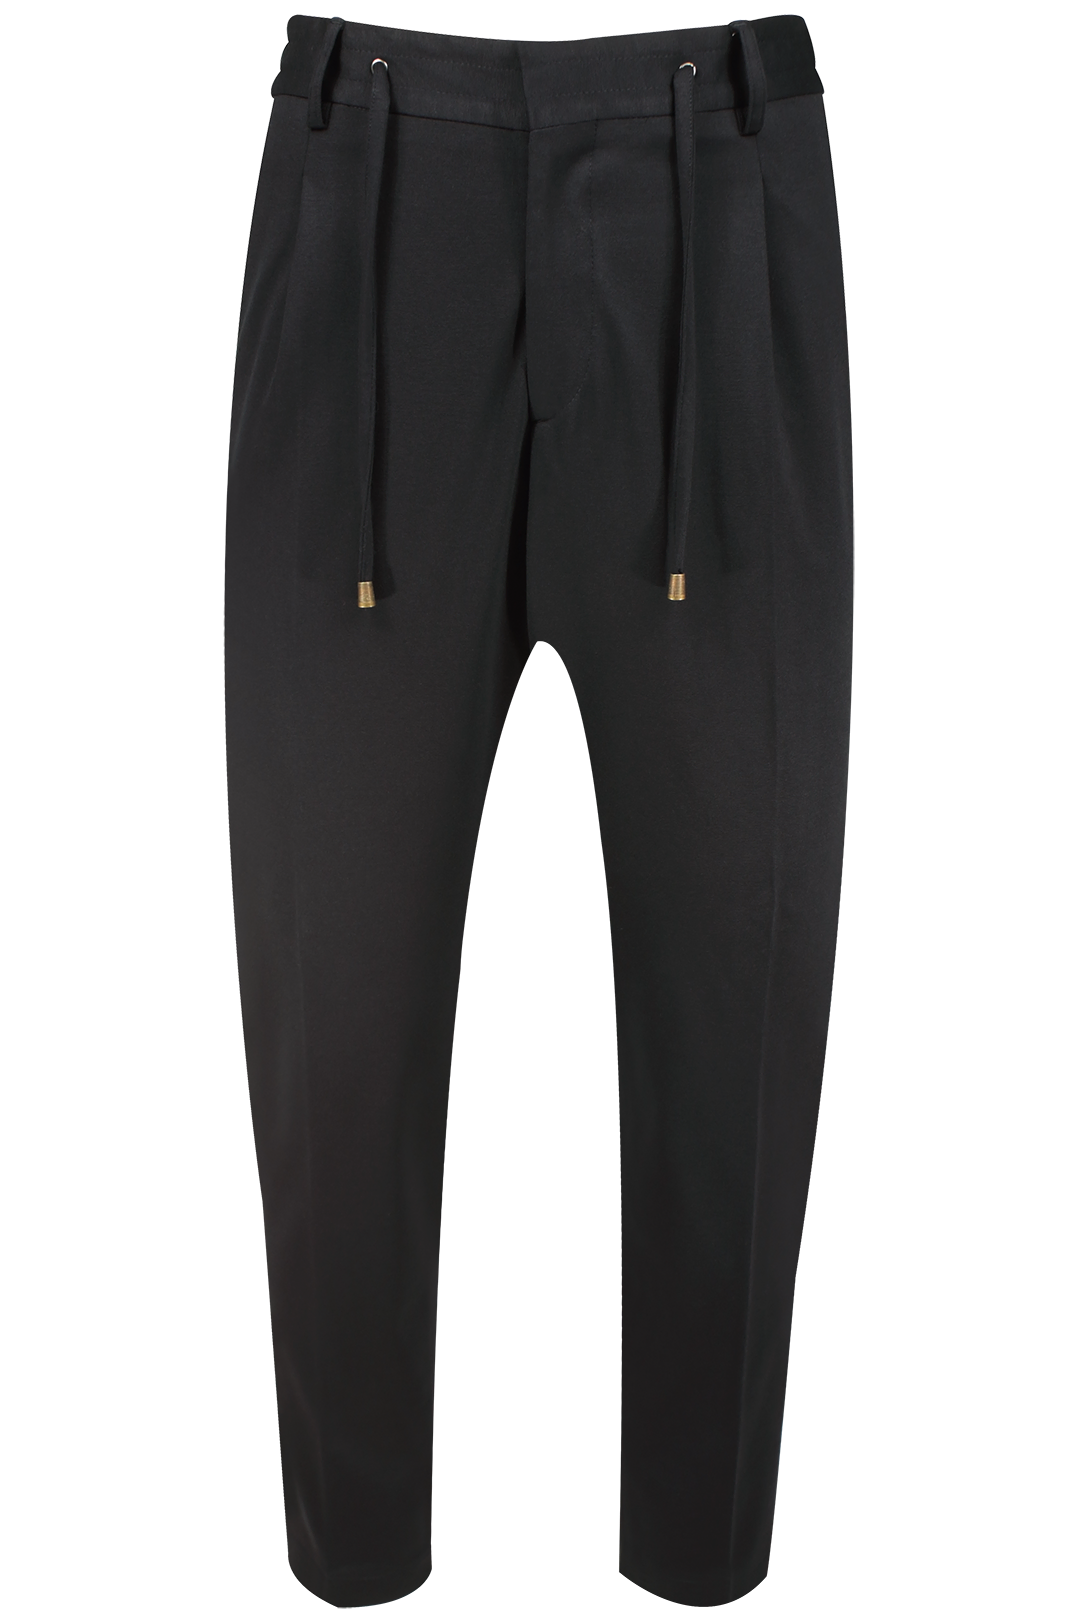 Pantalone con pince e coulisse in jersey nero